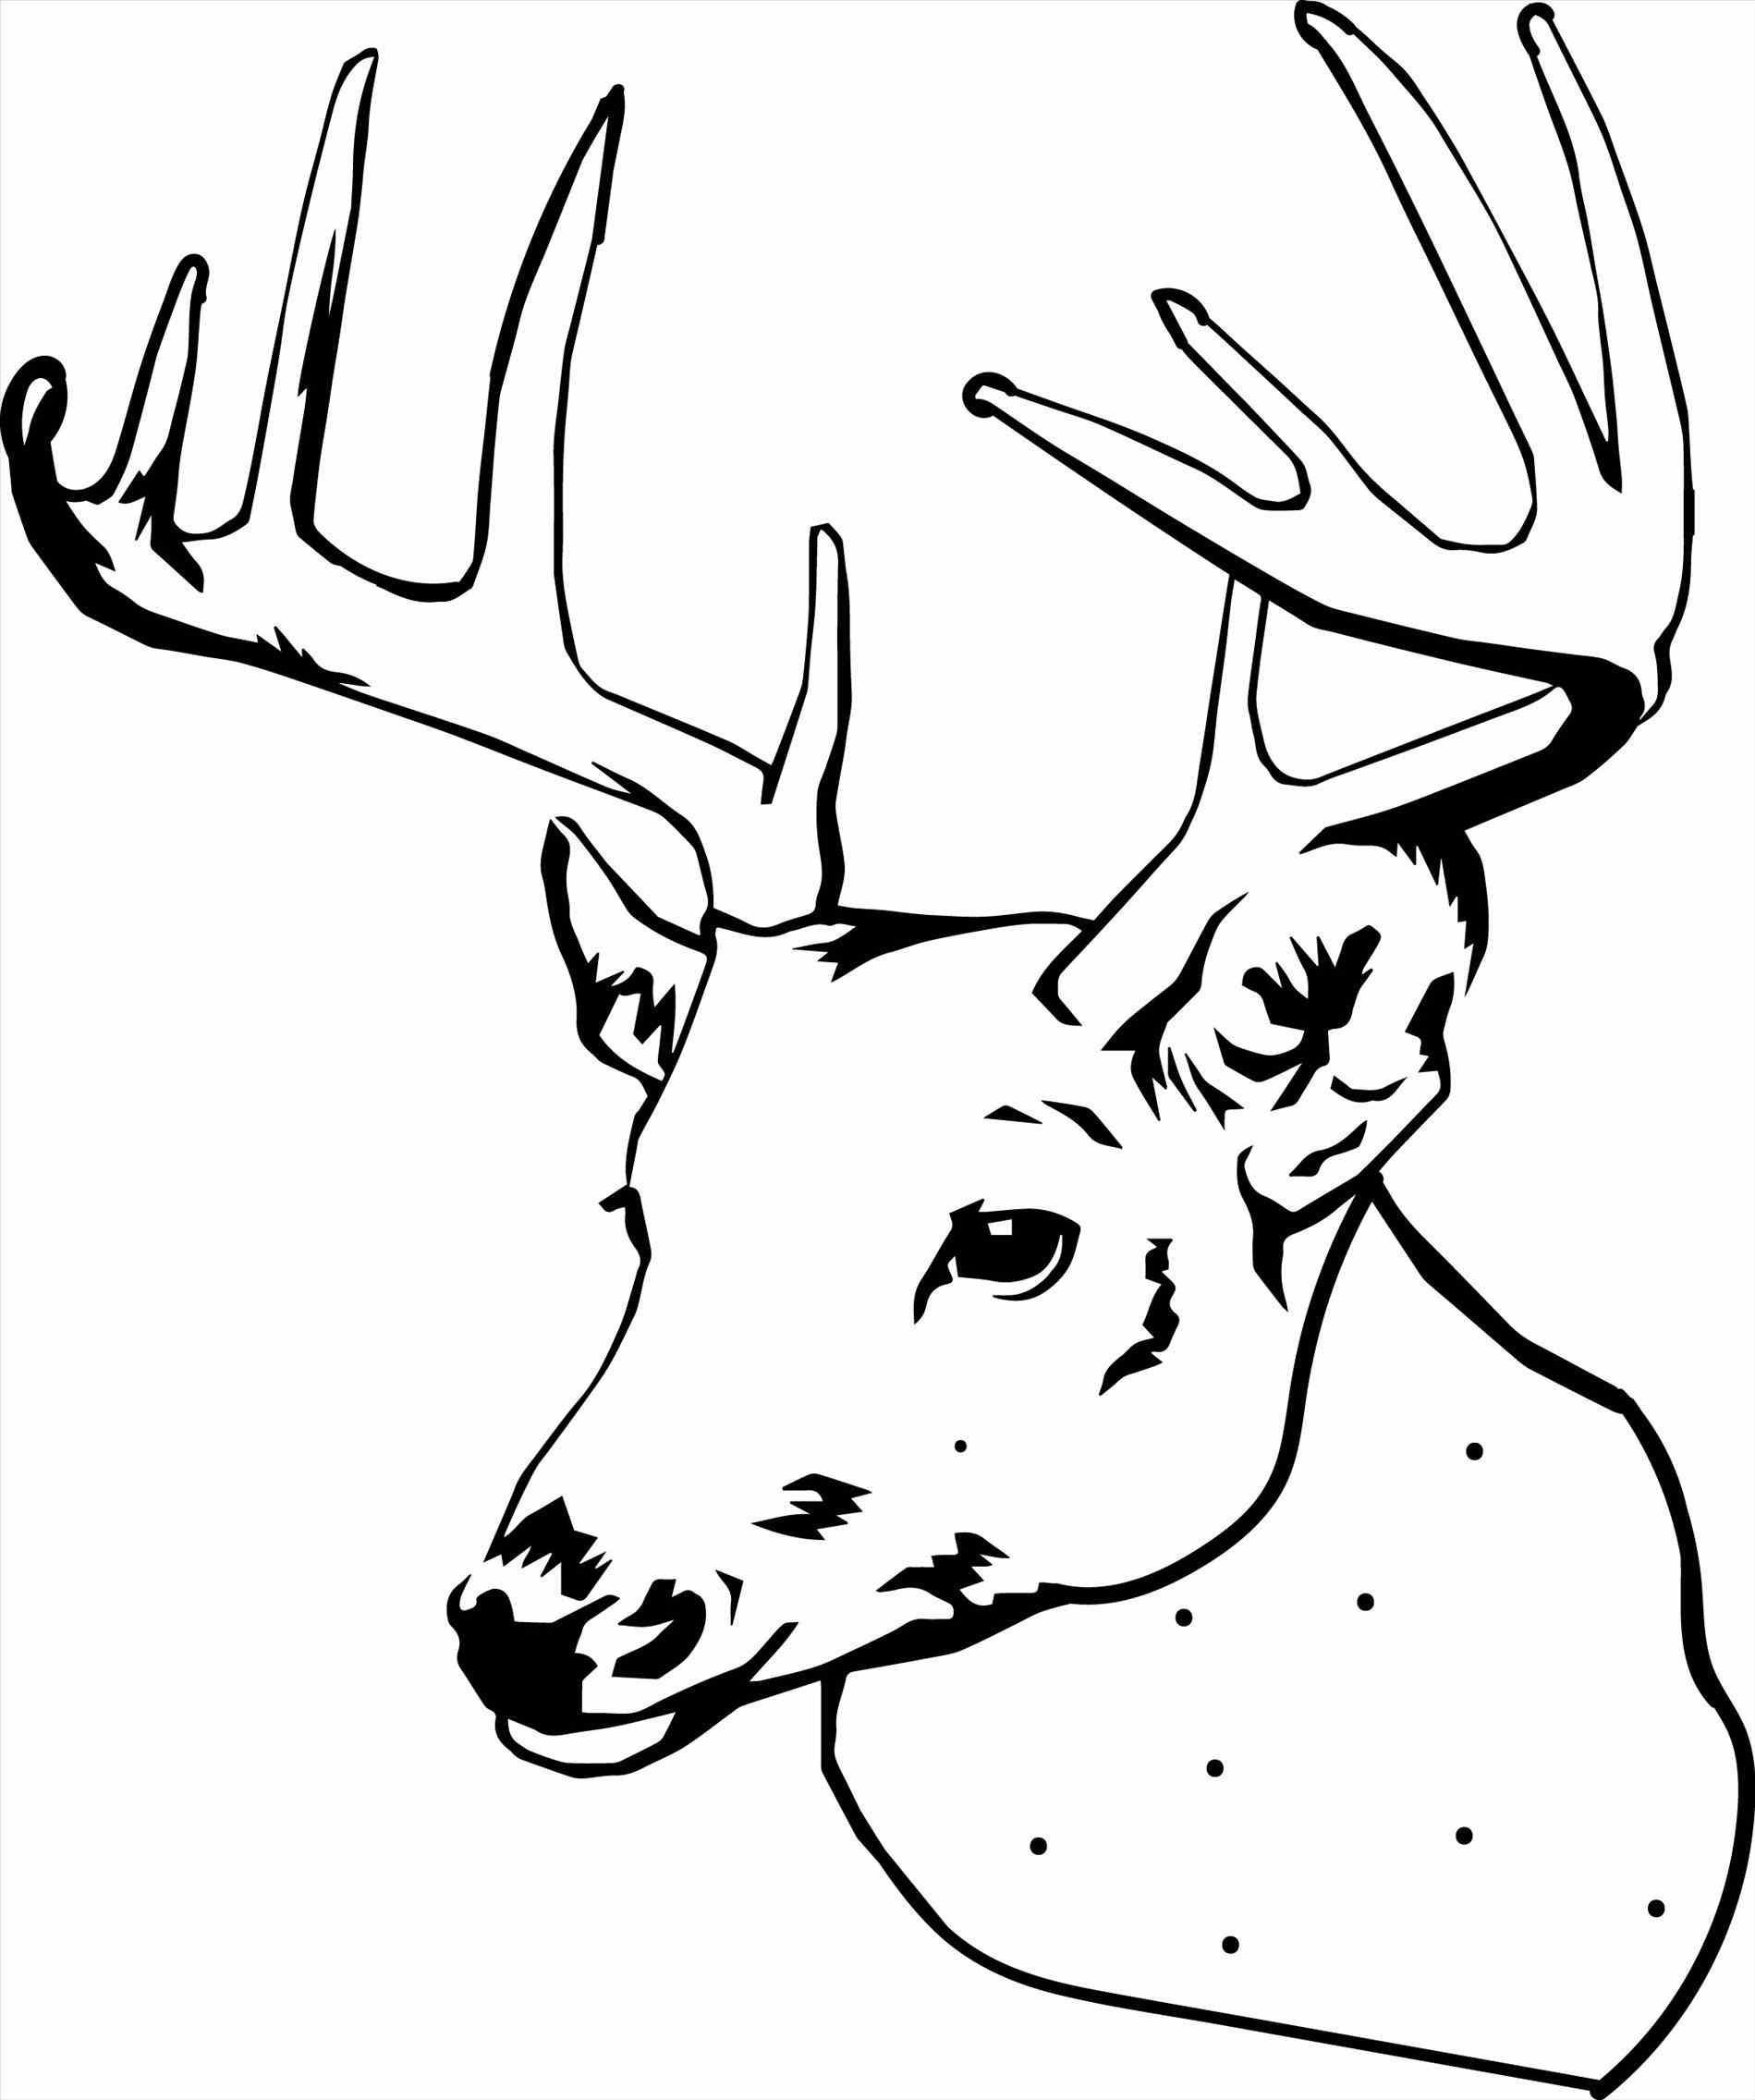 Coloring Pages Of Realistic Deer Red deer coloring pages download and